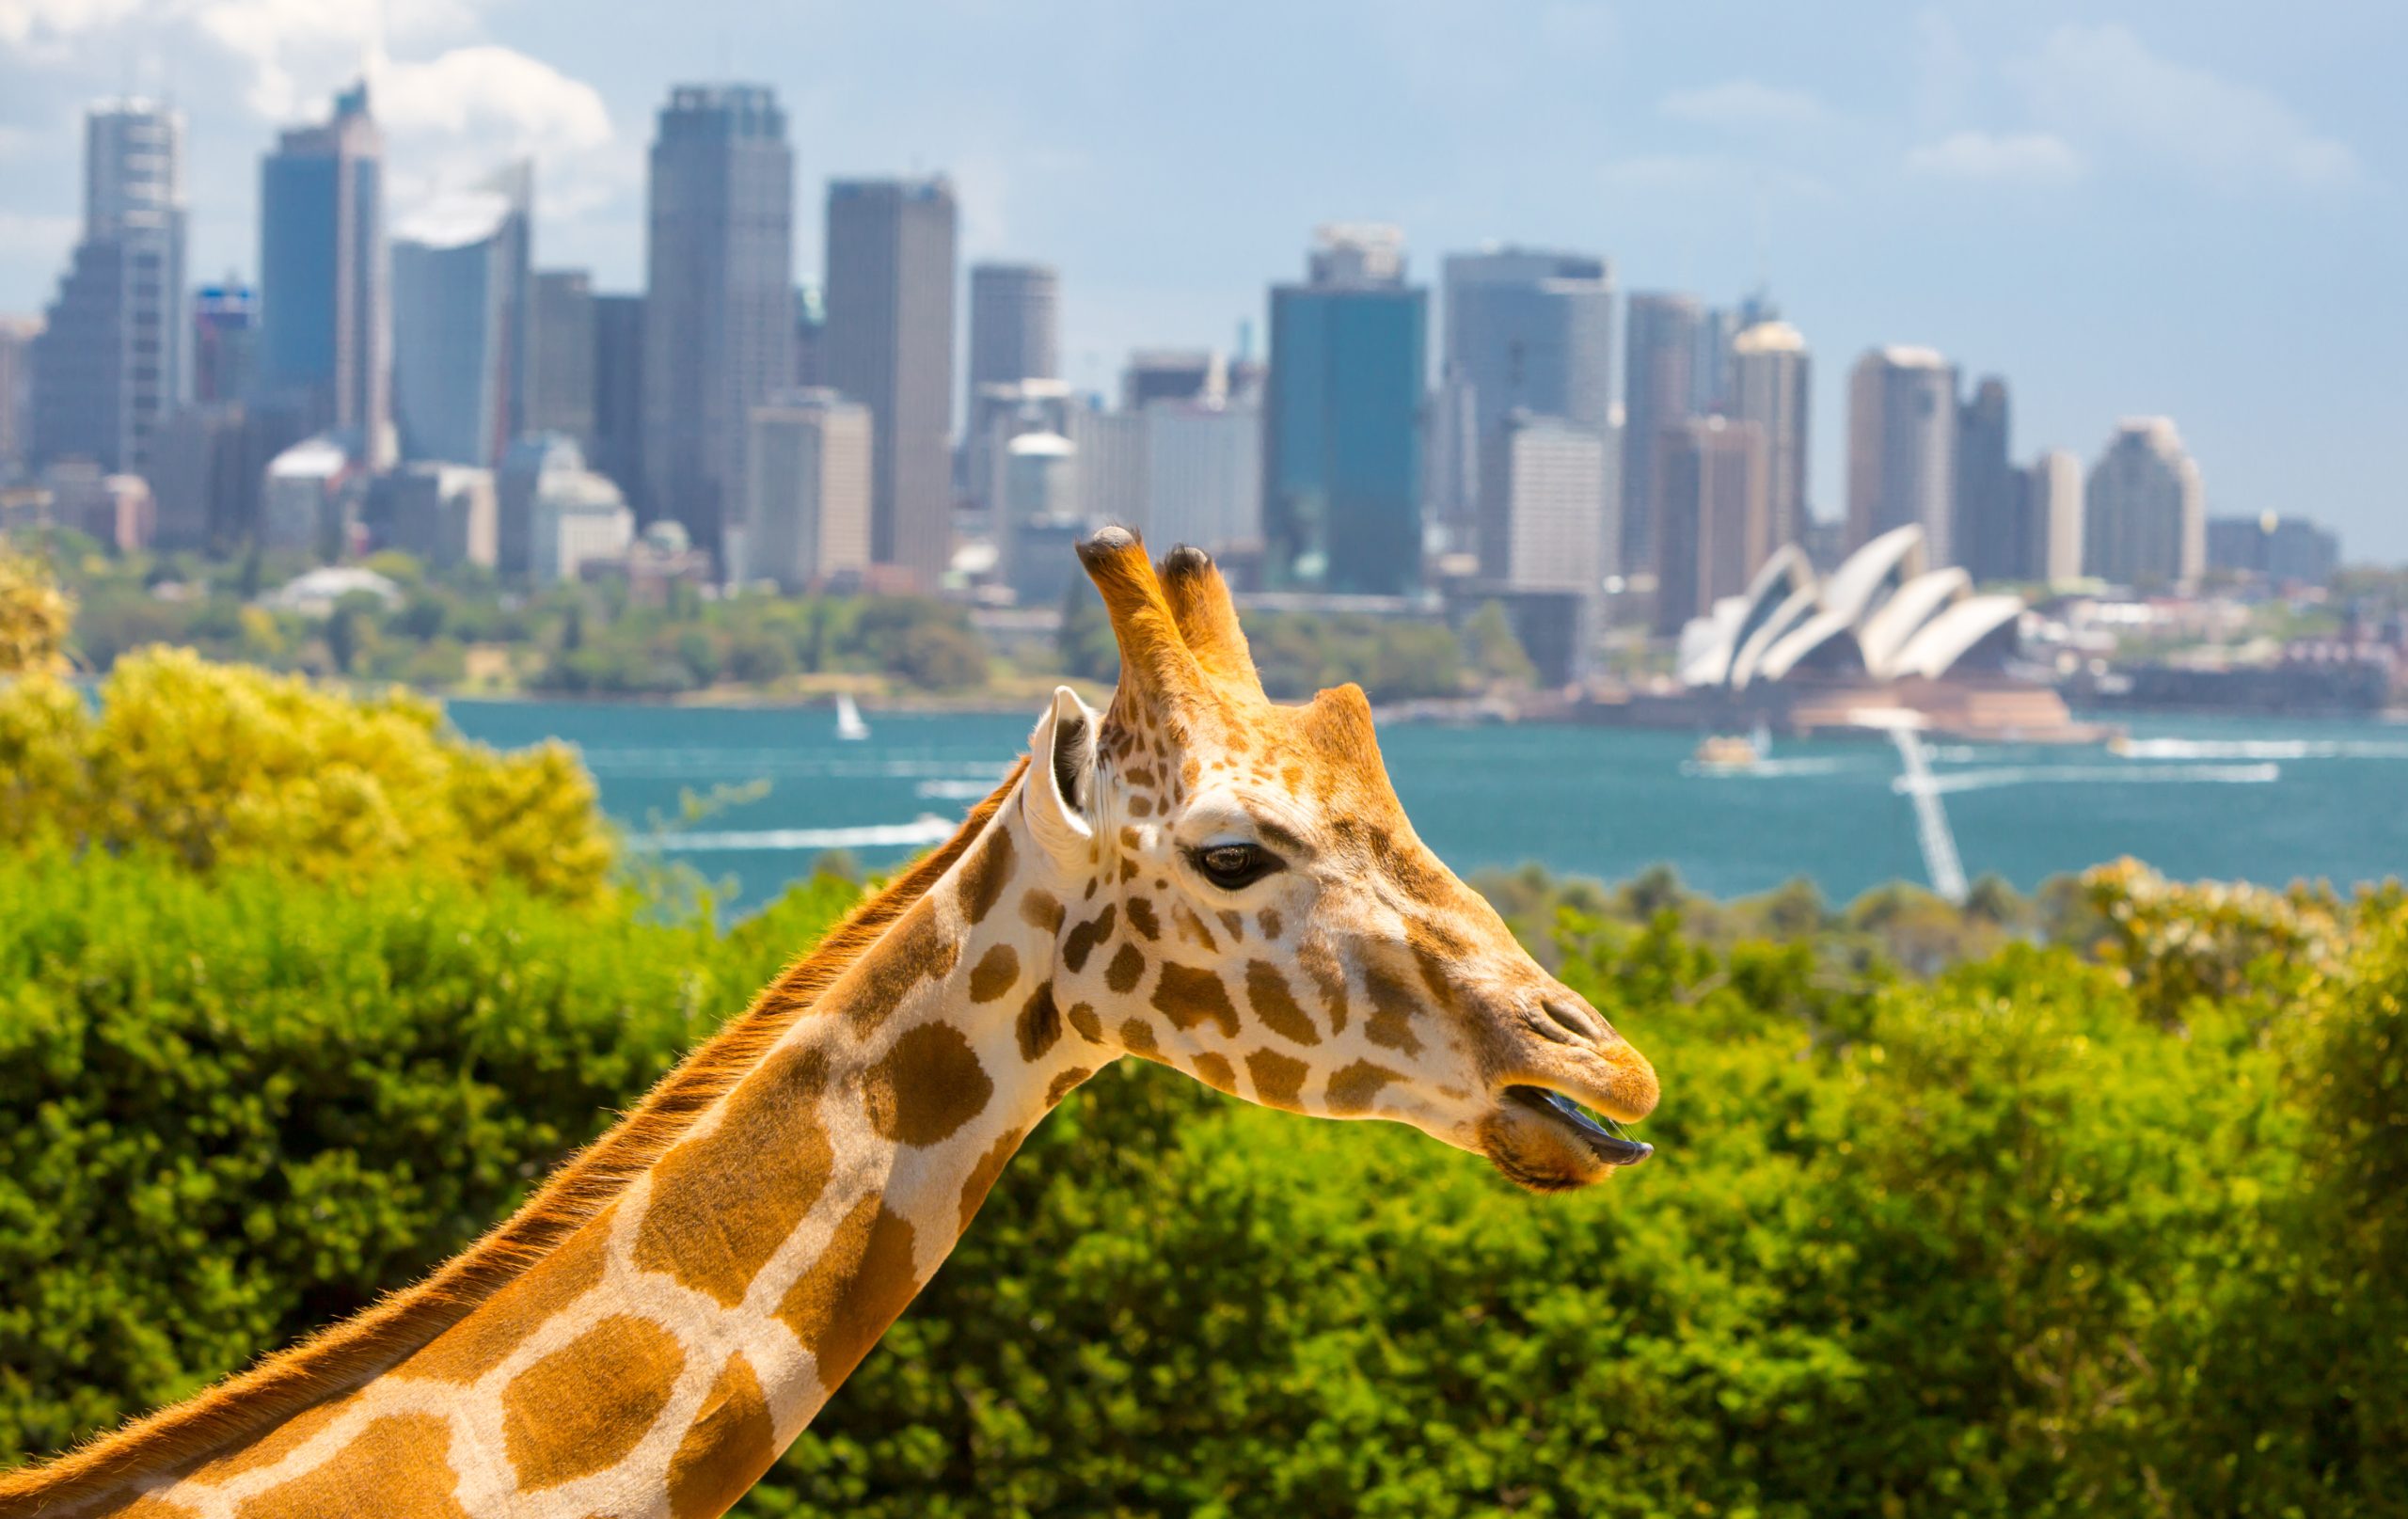 A giraffe at the Taronga Zoo in Sydney with the Opera House and skyline in the background.